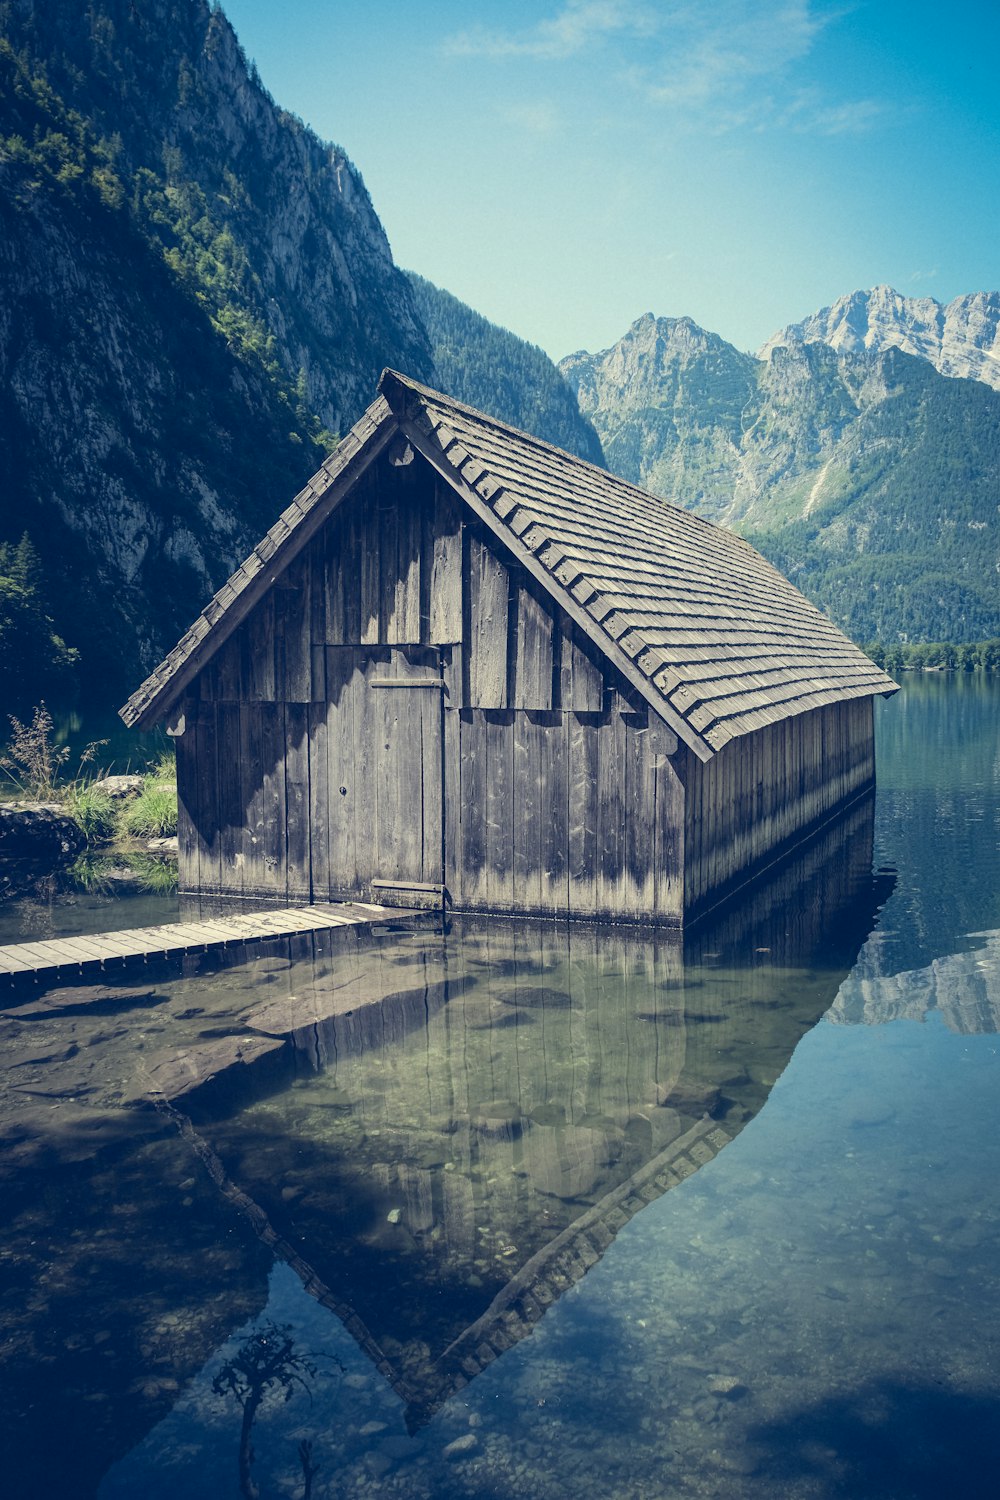 a wooden building sitting next to a body of water